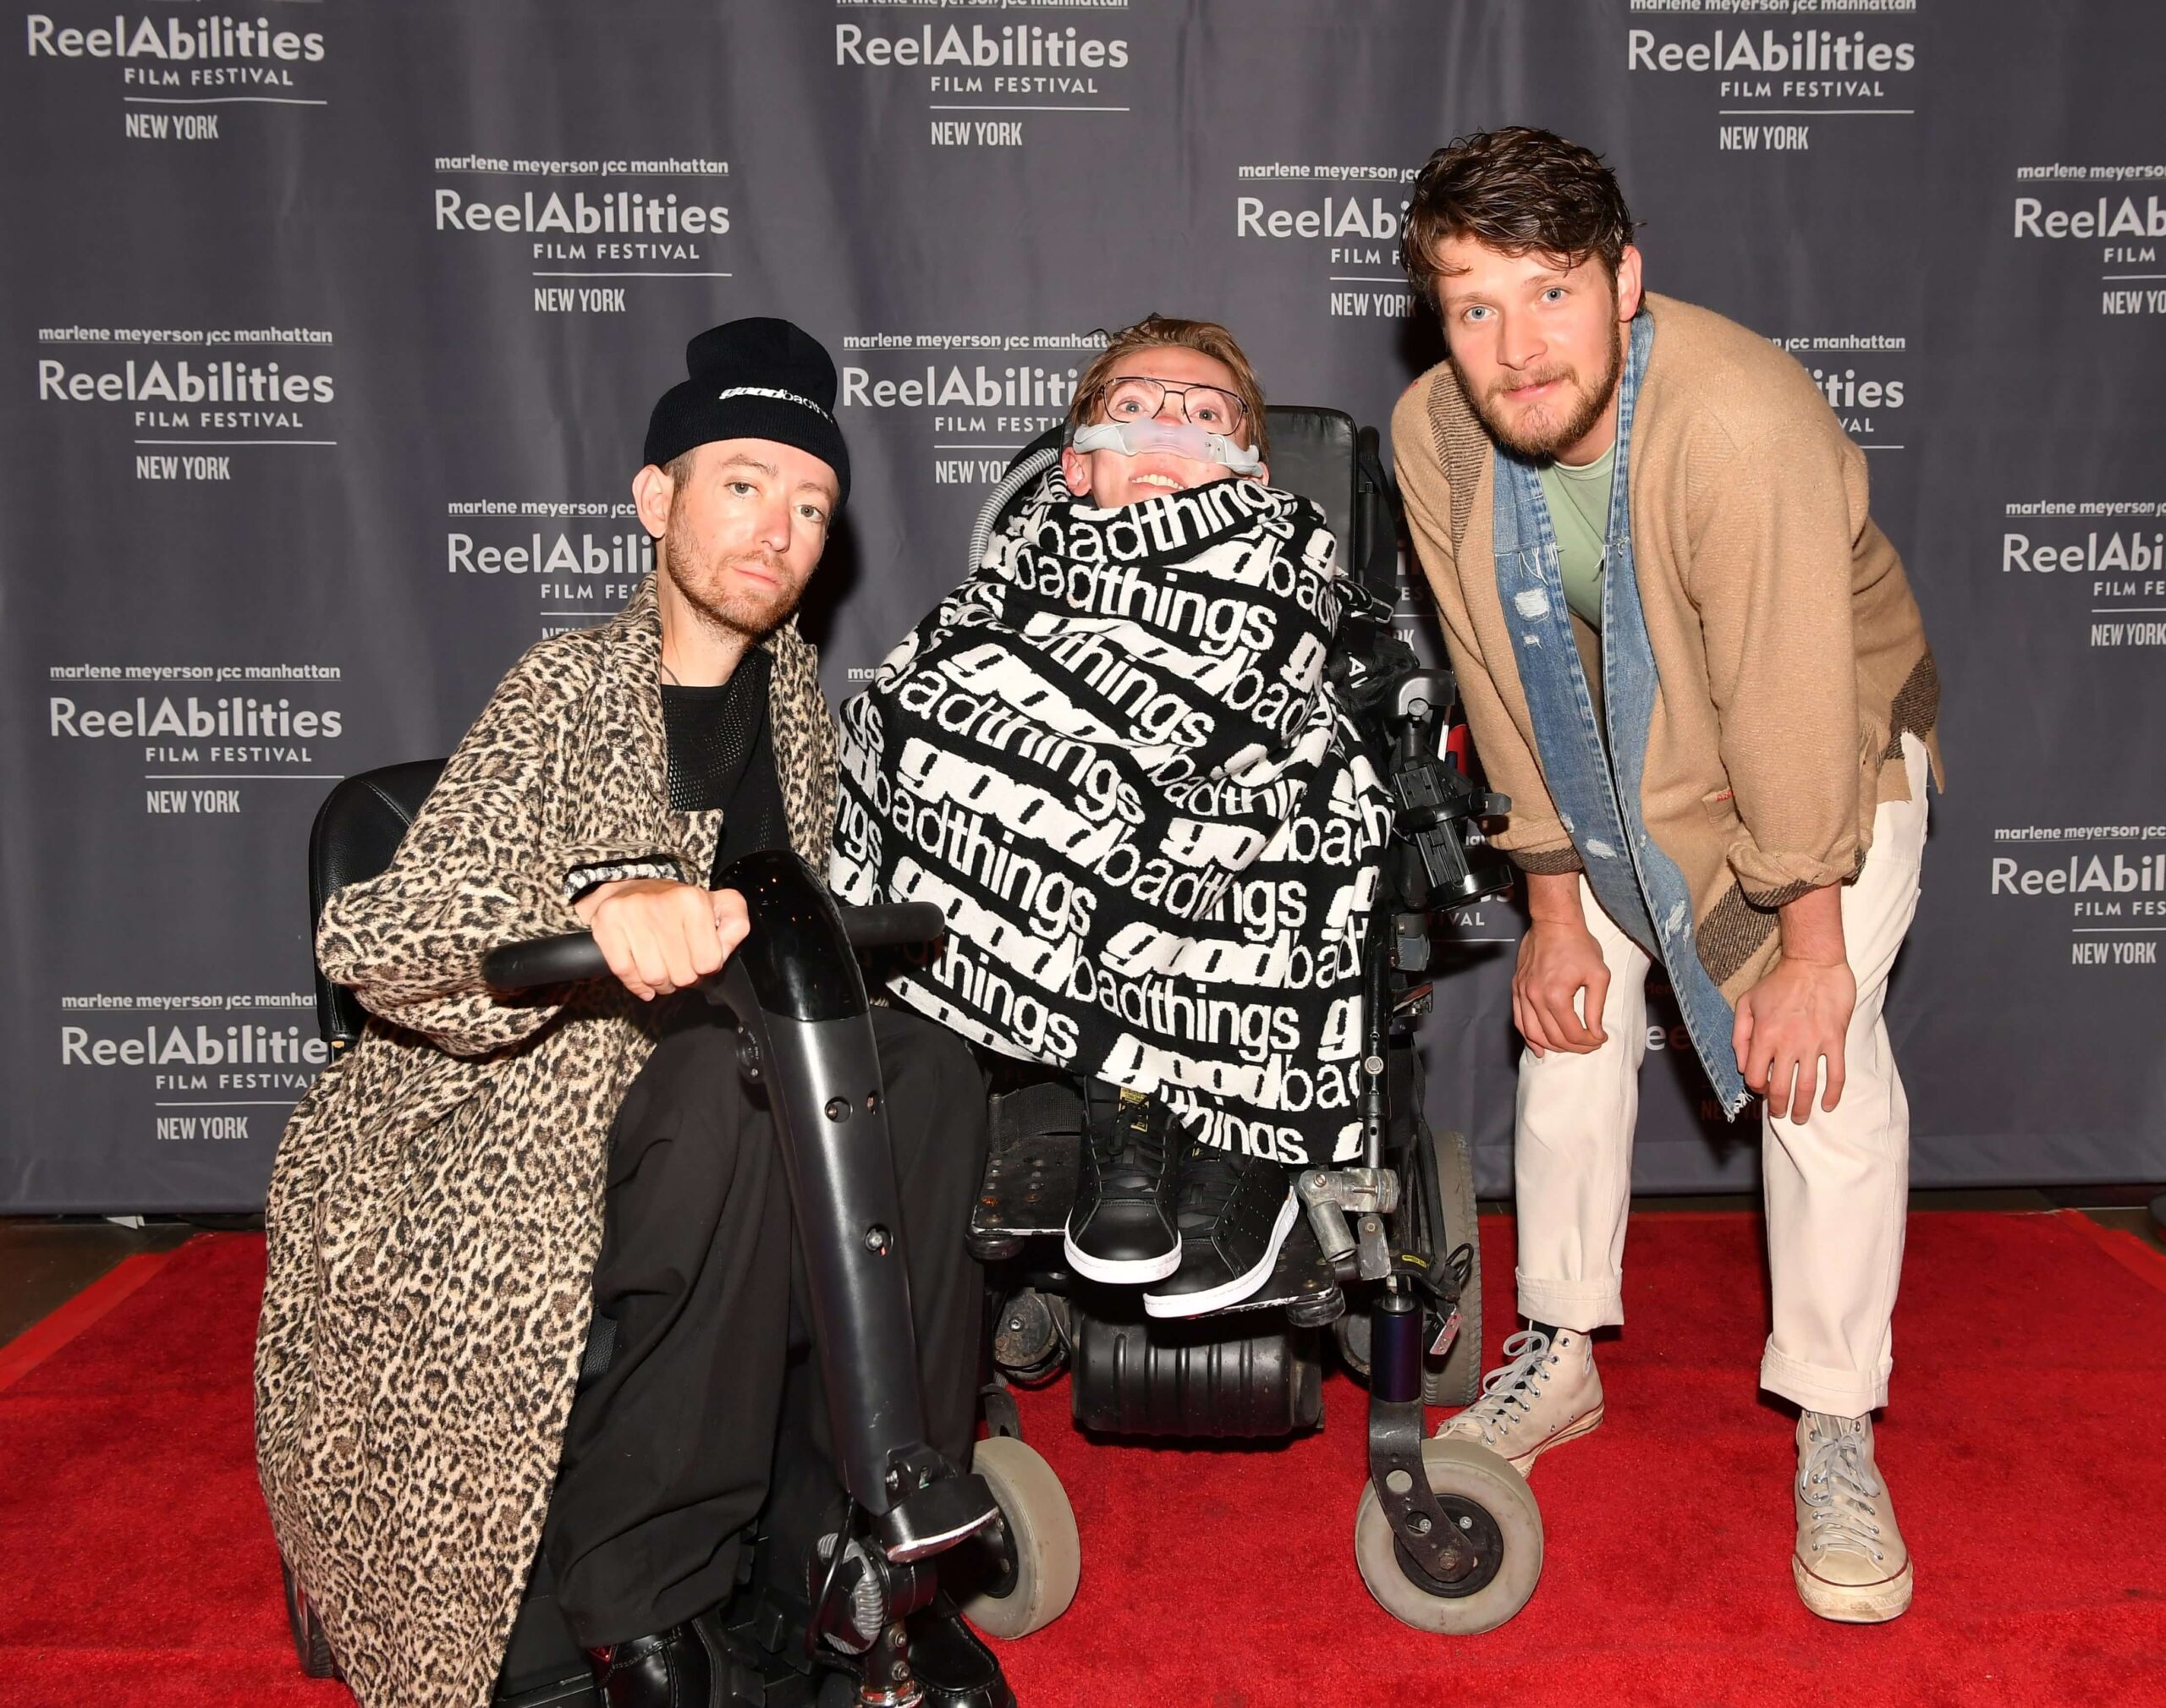 Actor Danny Kurtzman with a beanie cap and leopard pattern long coat, seating in a mobility device, Executive Producer Steve Way covered with a blanket with a text pattern saying Good Bad Things in white letters over black background, Actor Brett Dier in a brown jacket and white pants leaning forward. All three are lined up on a red carpet, with a banner carrying the ReelAbilities Film Festival logo behind them.